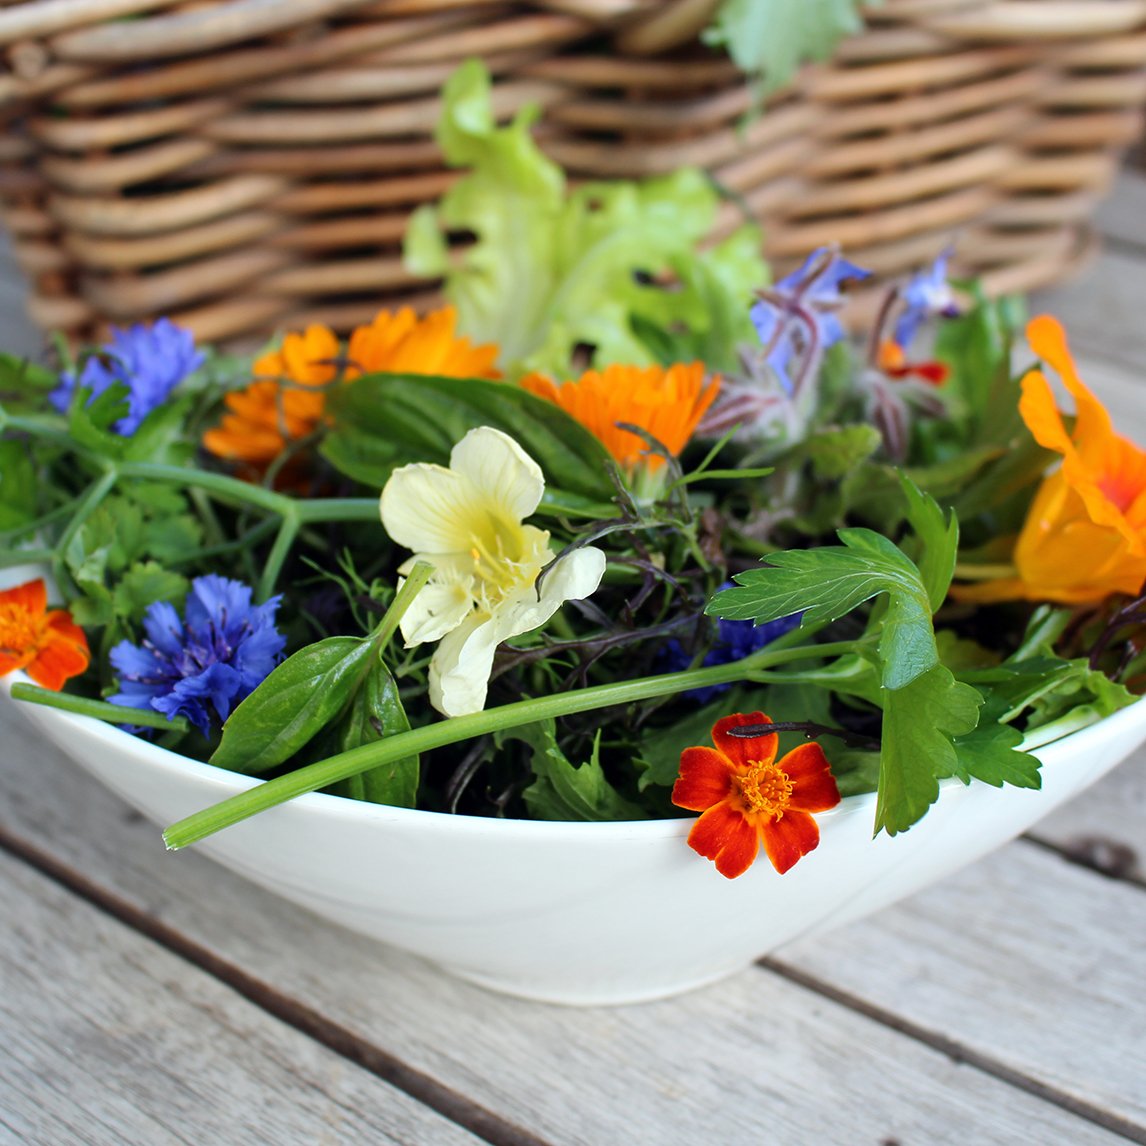 Edible Flower Collection - The Diggers Club